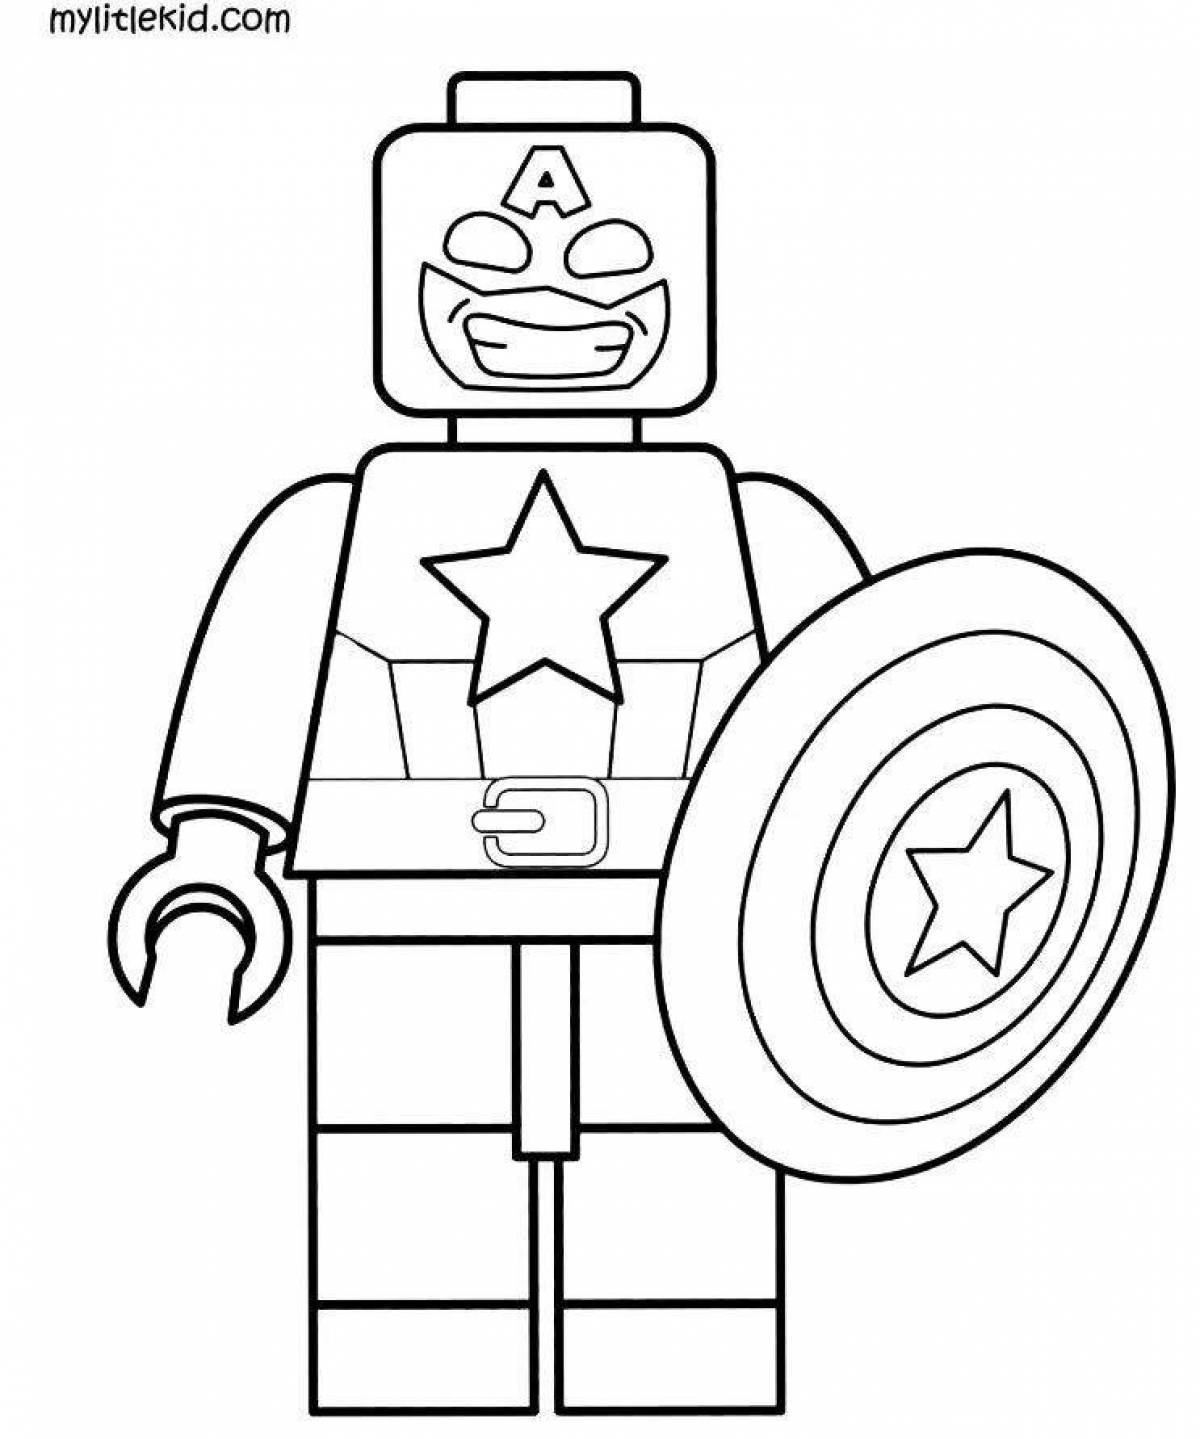 Radiant lego superheroes coloring book